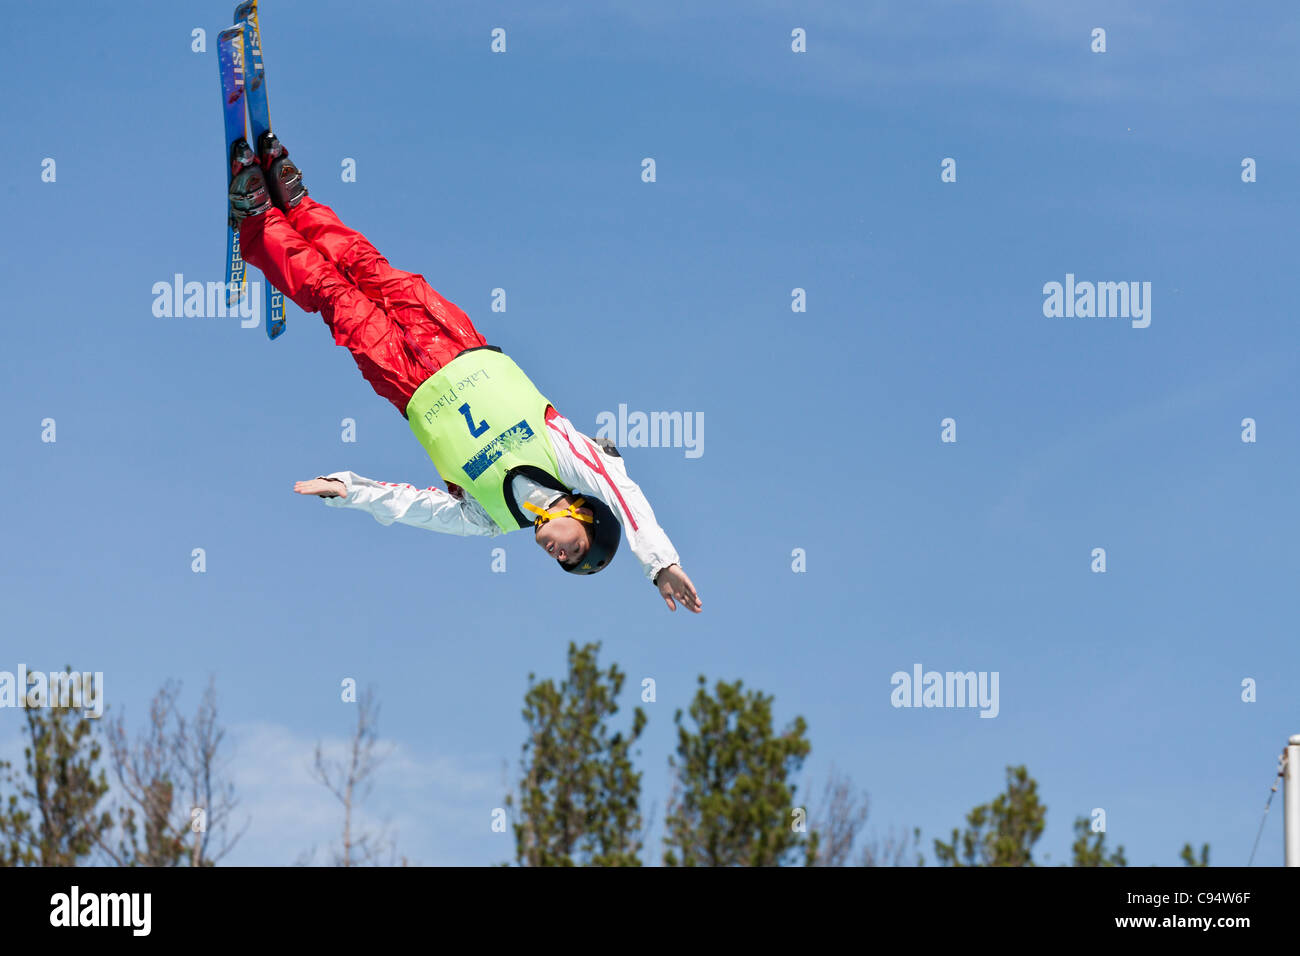 Head first into the waters/ trees. A freestyle skier eyeing the watery landing spot during summer practice for olympic sport Stock Photo